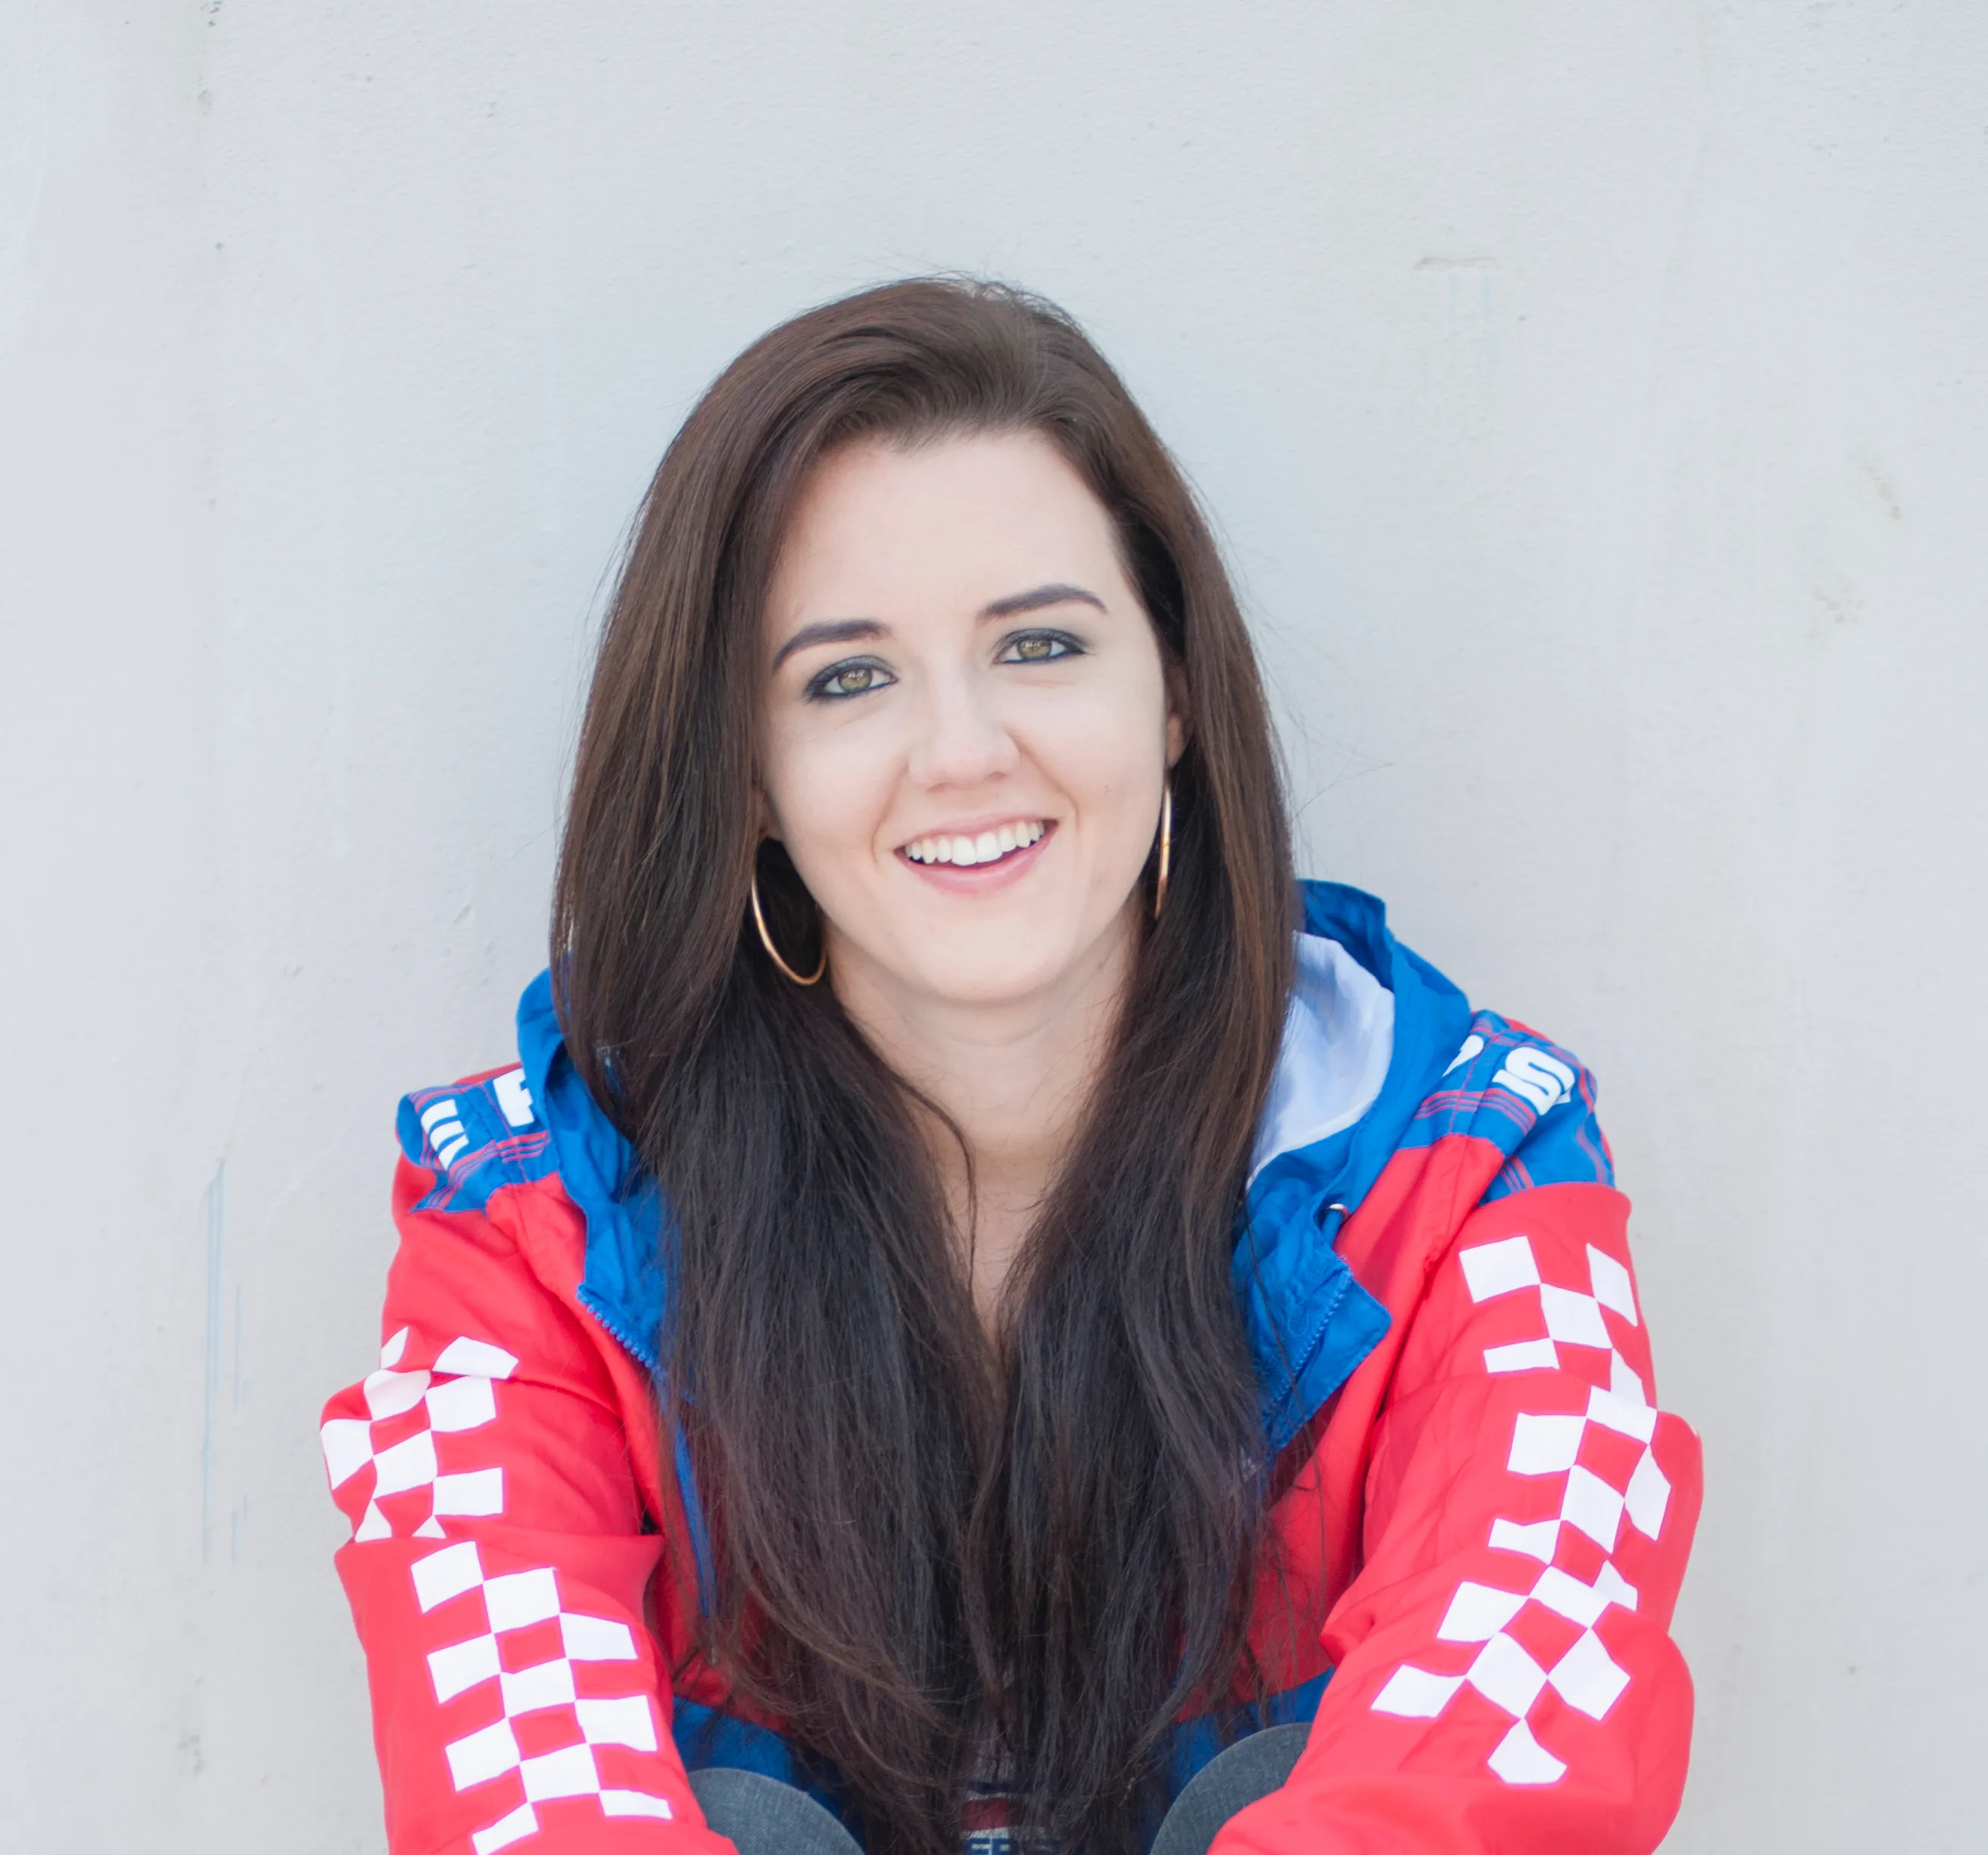 A headshot of a lady wearing a red, blue and white jacket